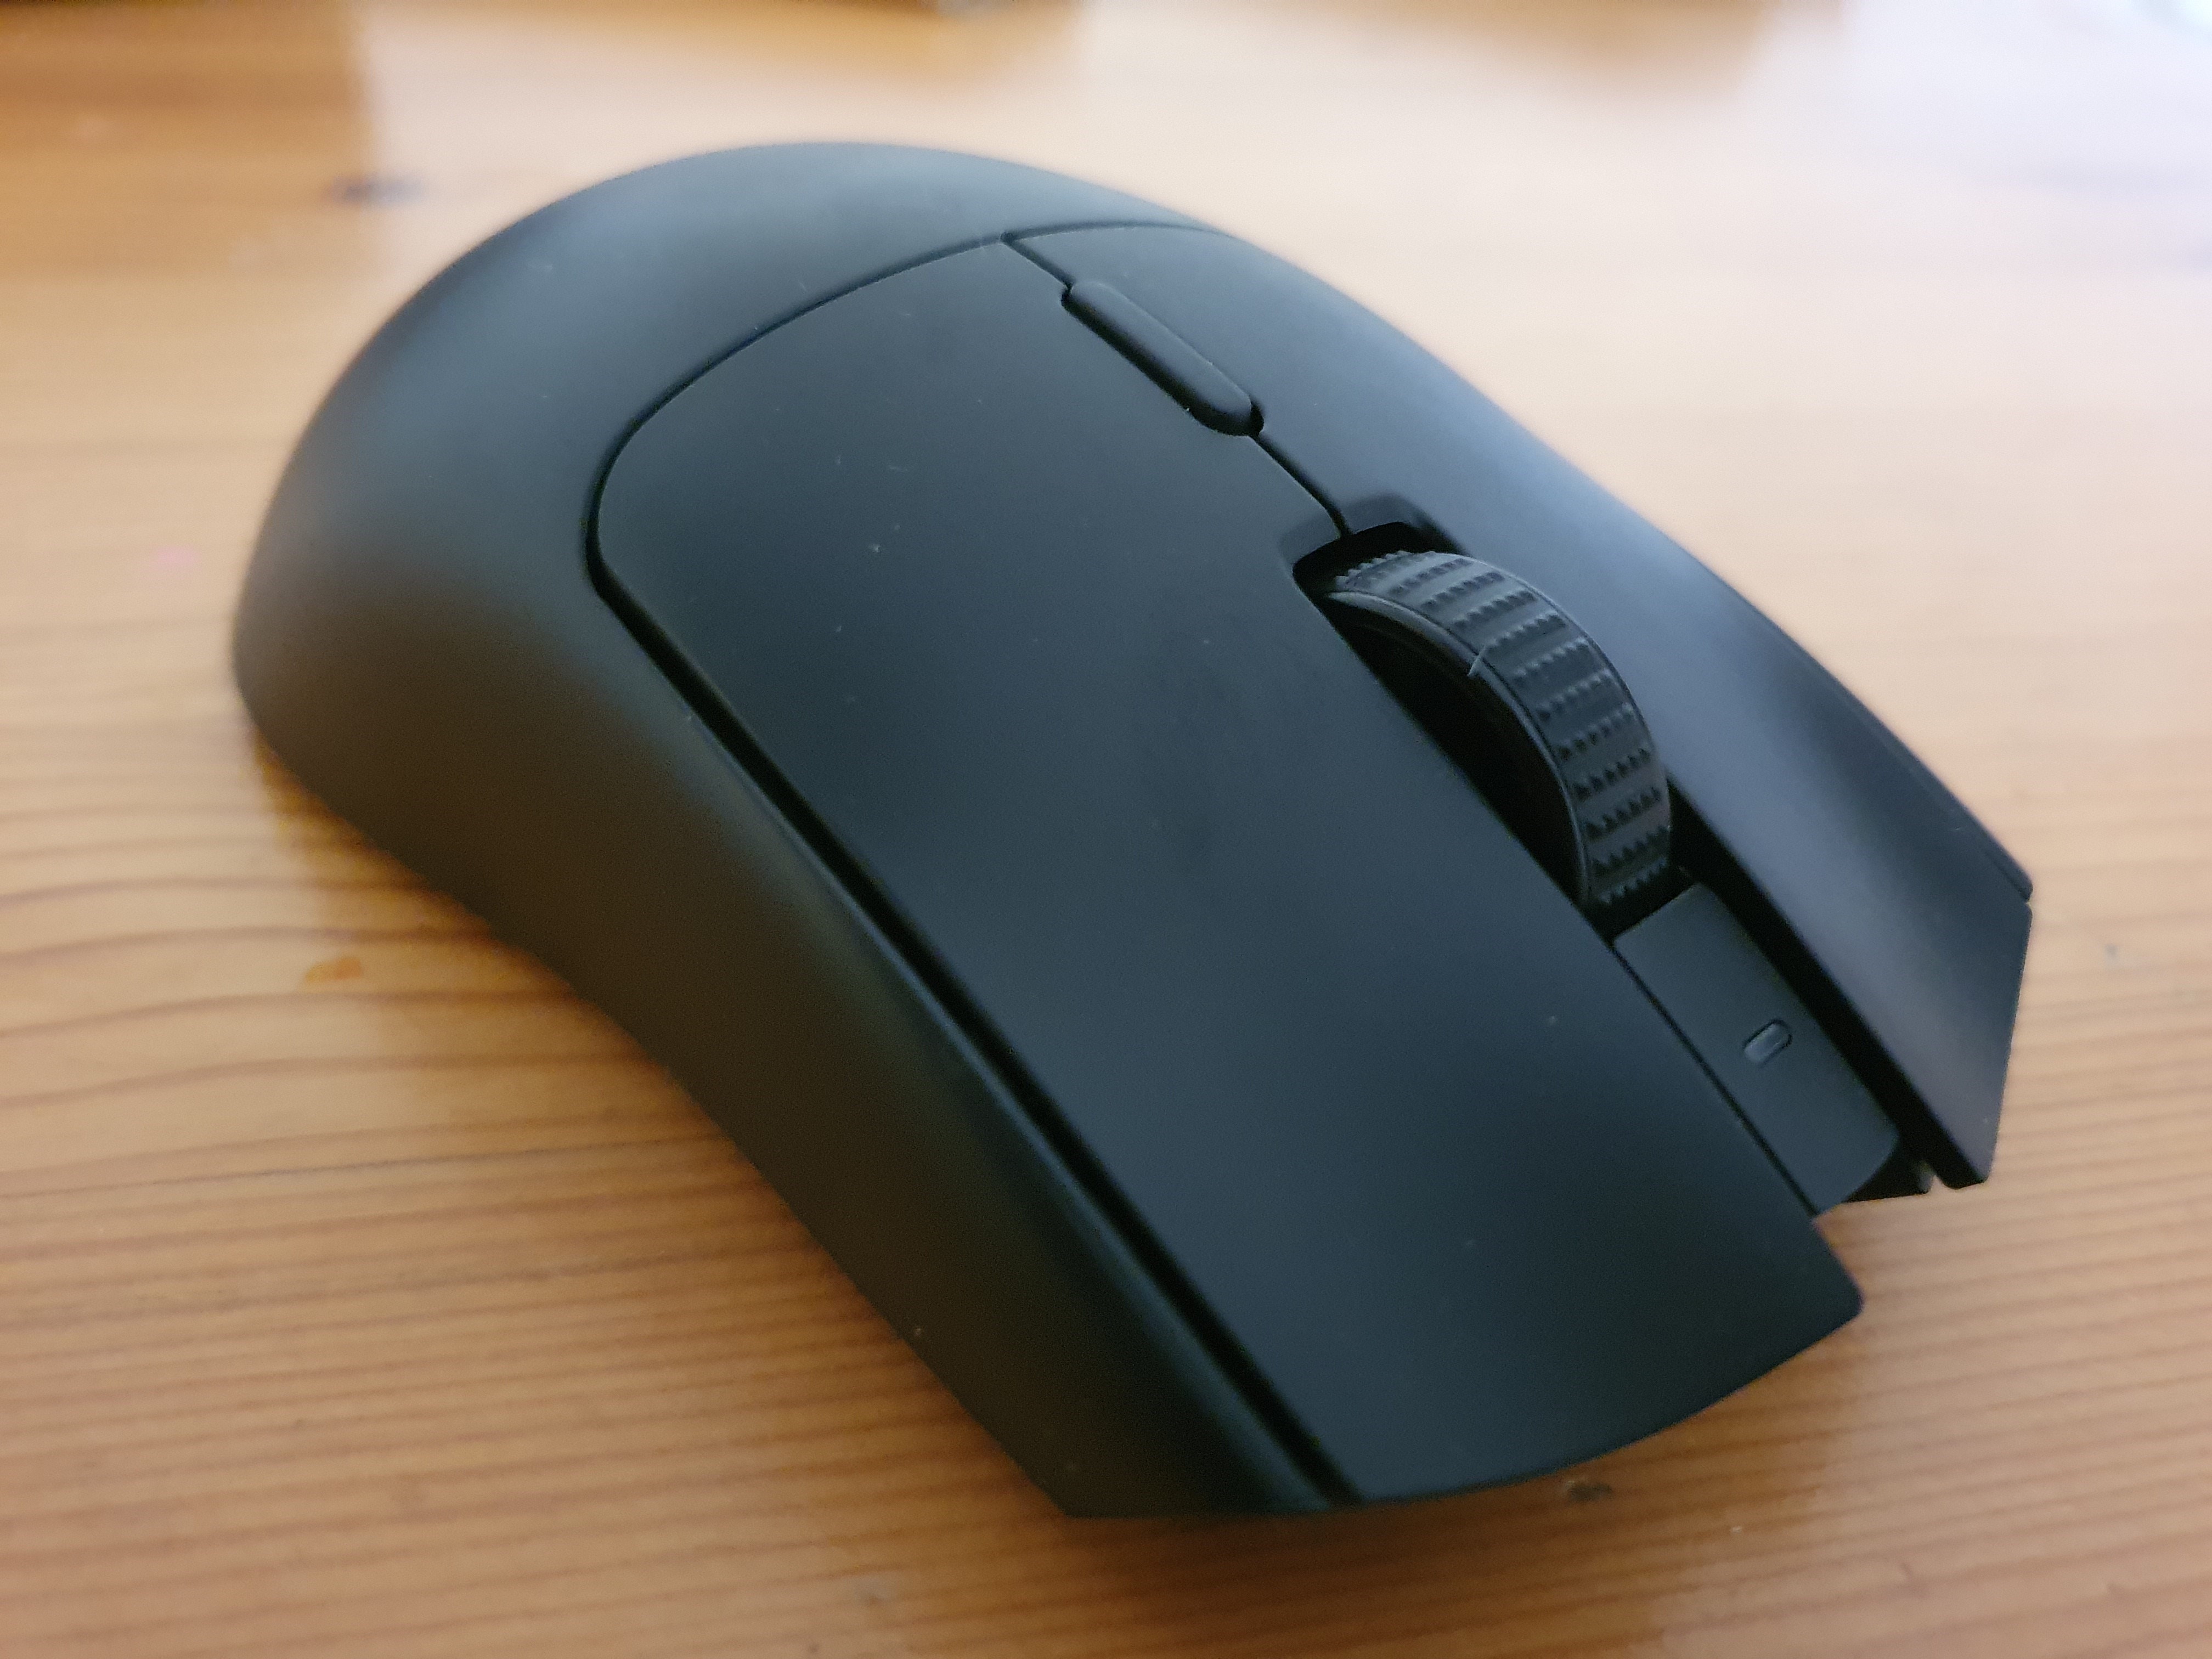 Razer Viper V3 Hyperspeed - Handiest twin-cause gaming and productivity mouse 